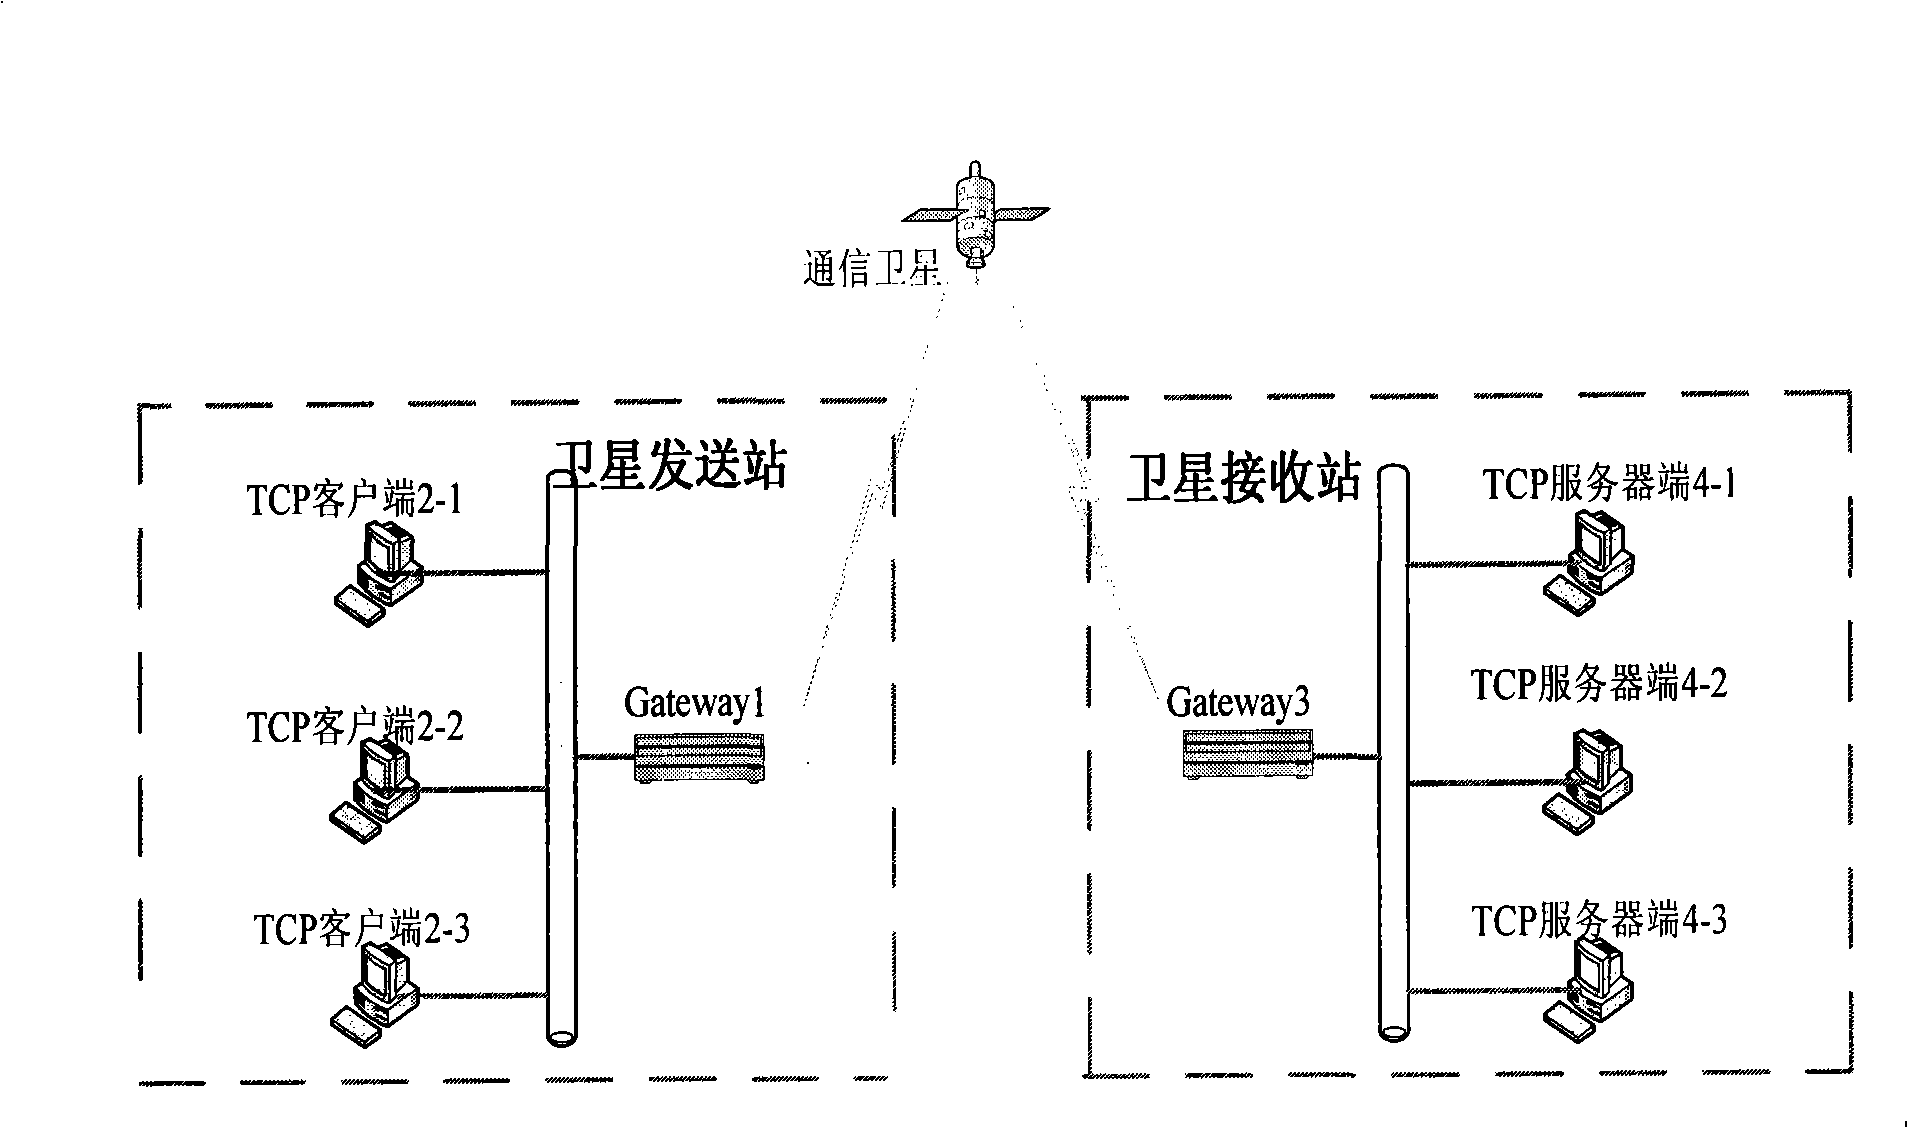 Method for reinforcing TCP protocol performance in satellite communication system